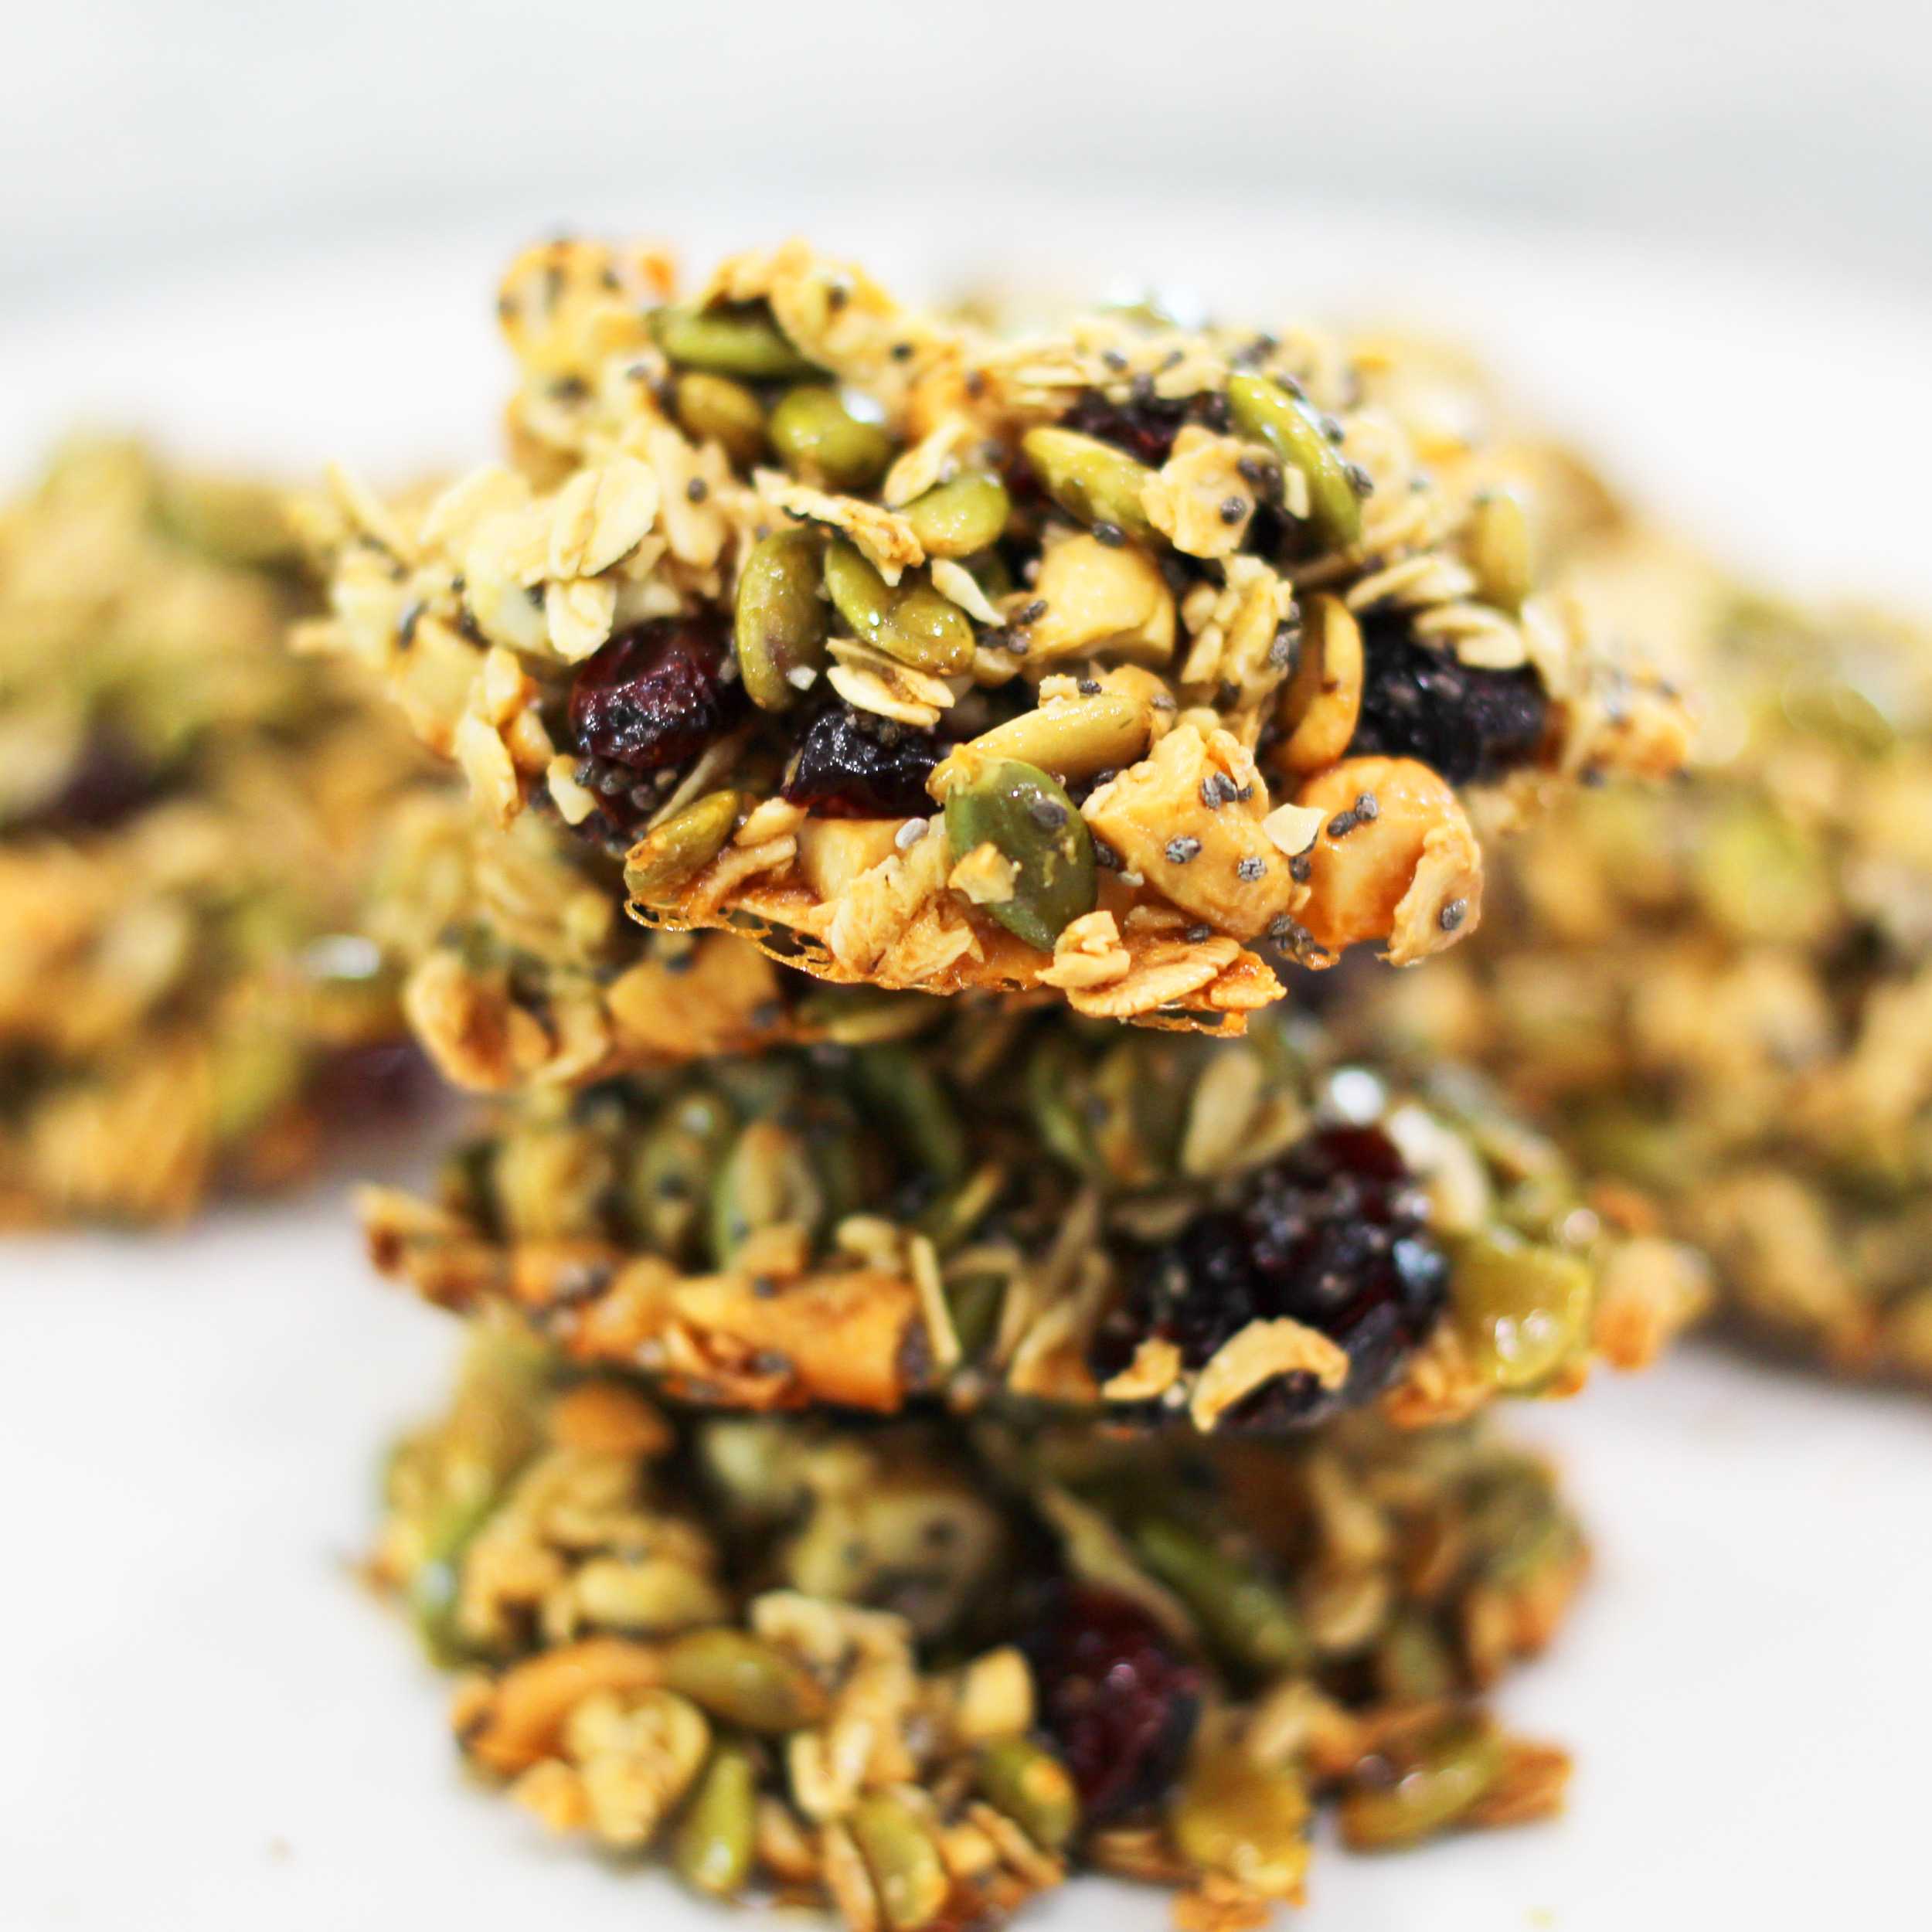 Crunchy cranberry cookie with oats, nuts, seeds, and sweet cranberries